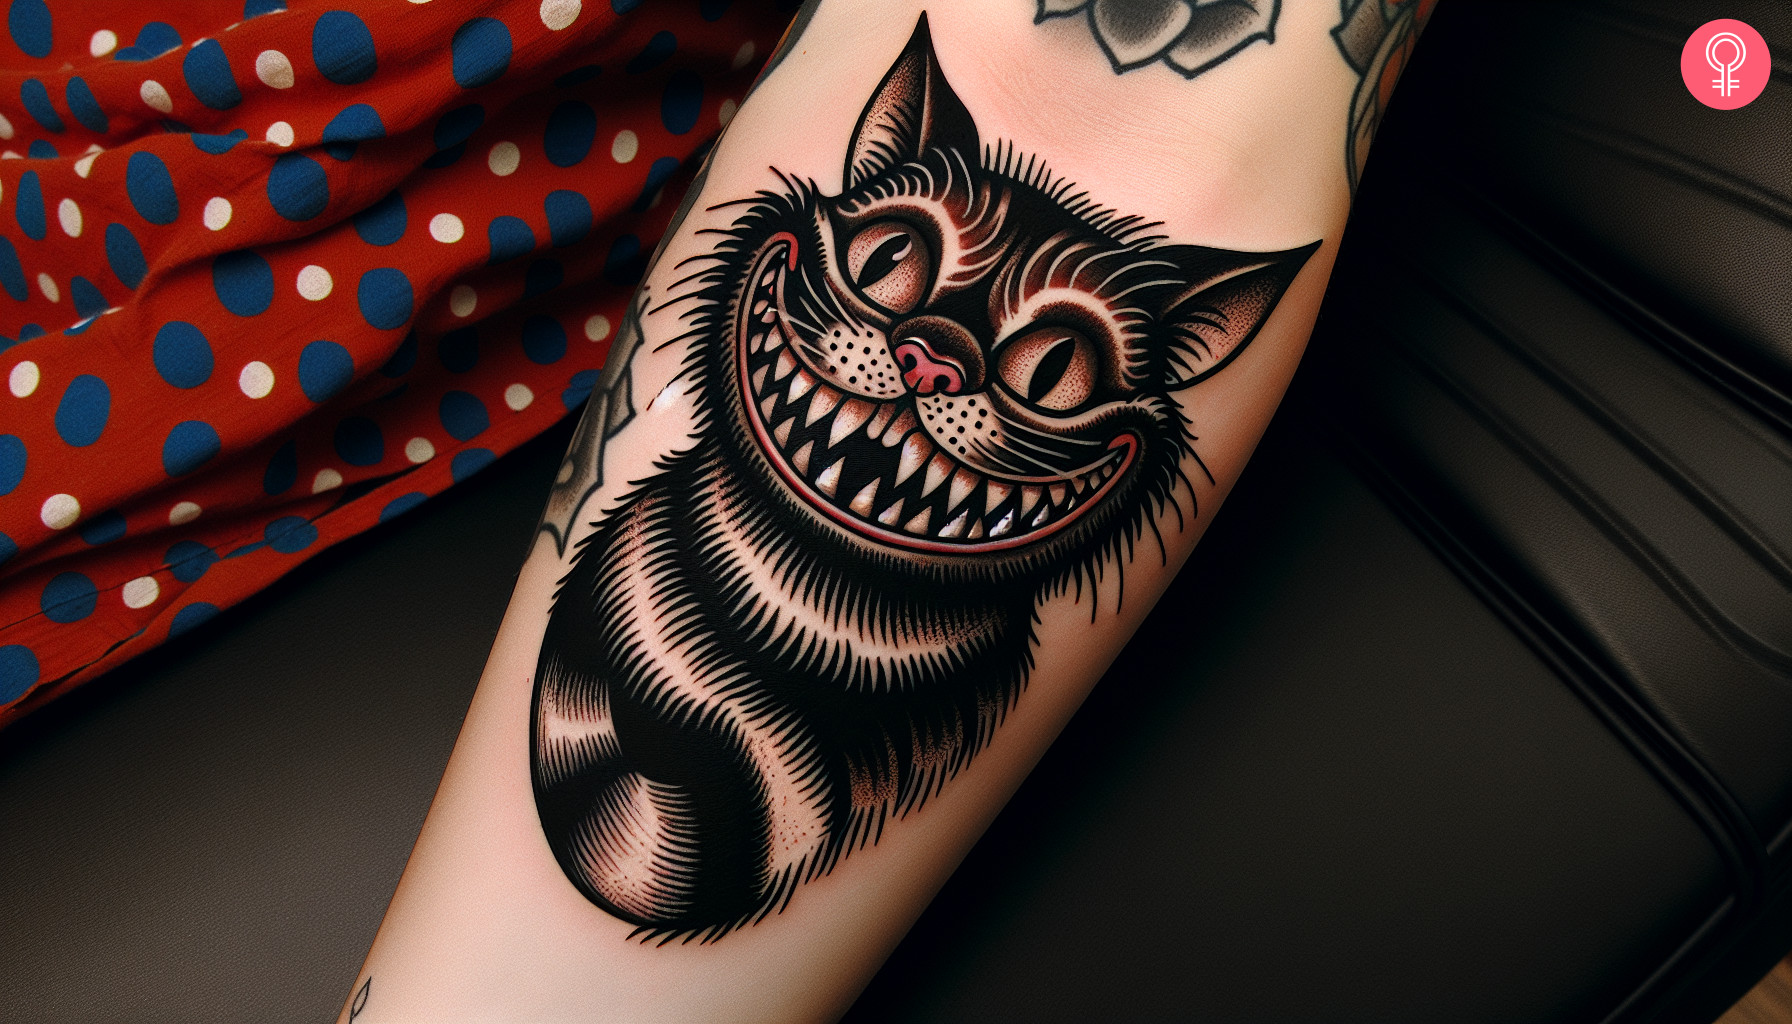 Evil cheshire cat tattoo on the inner arm